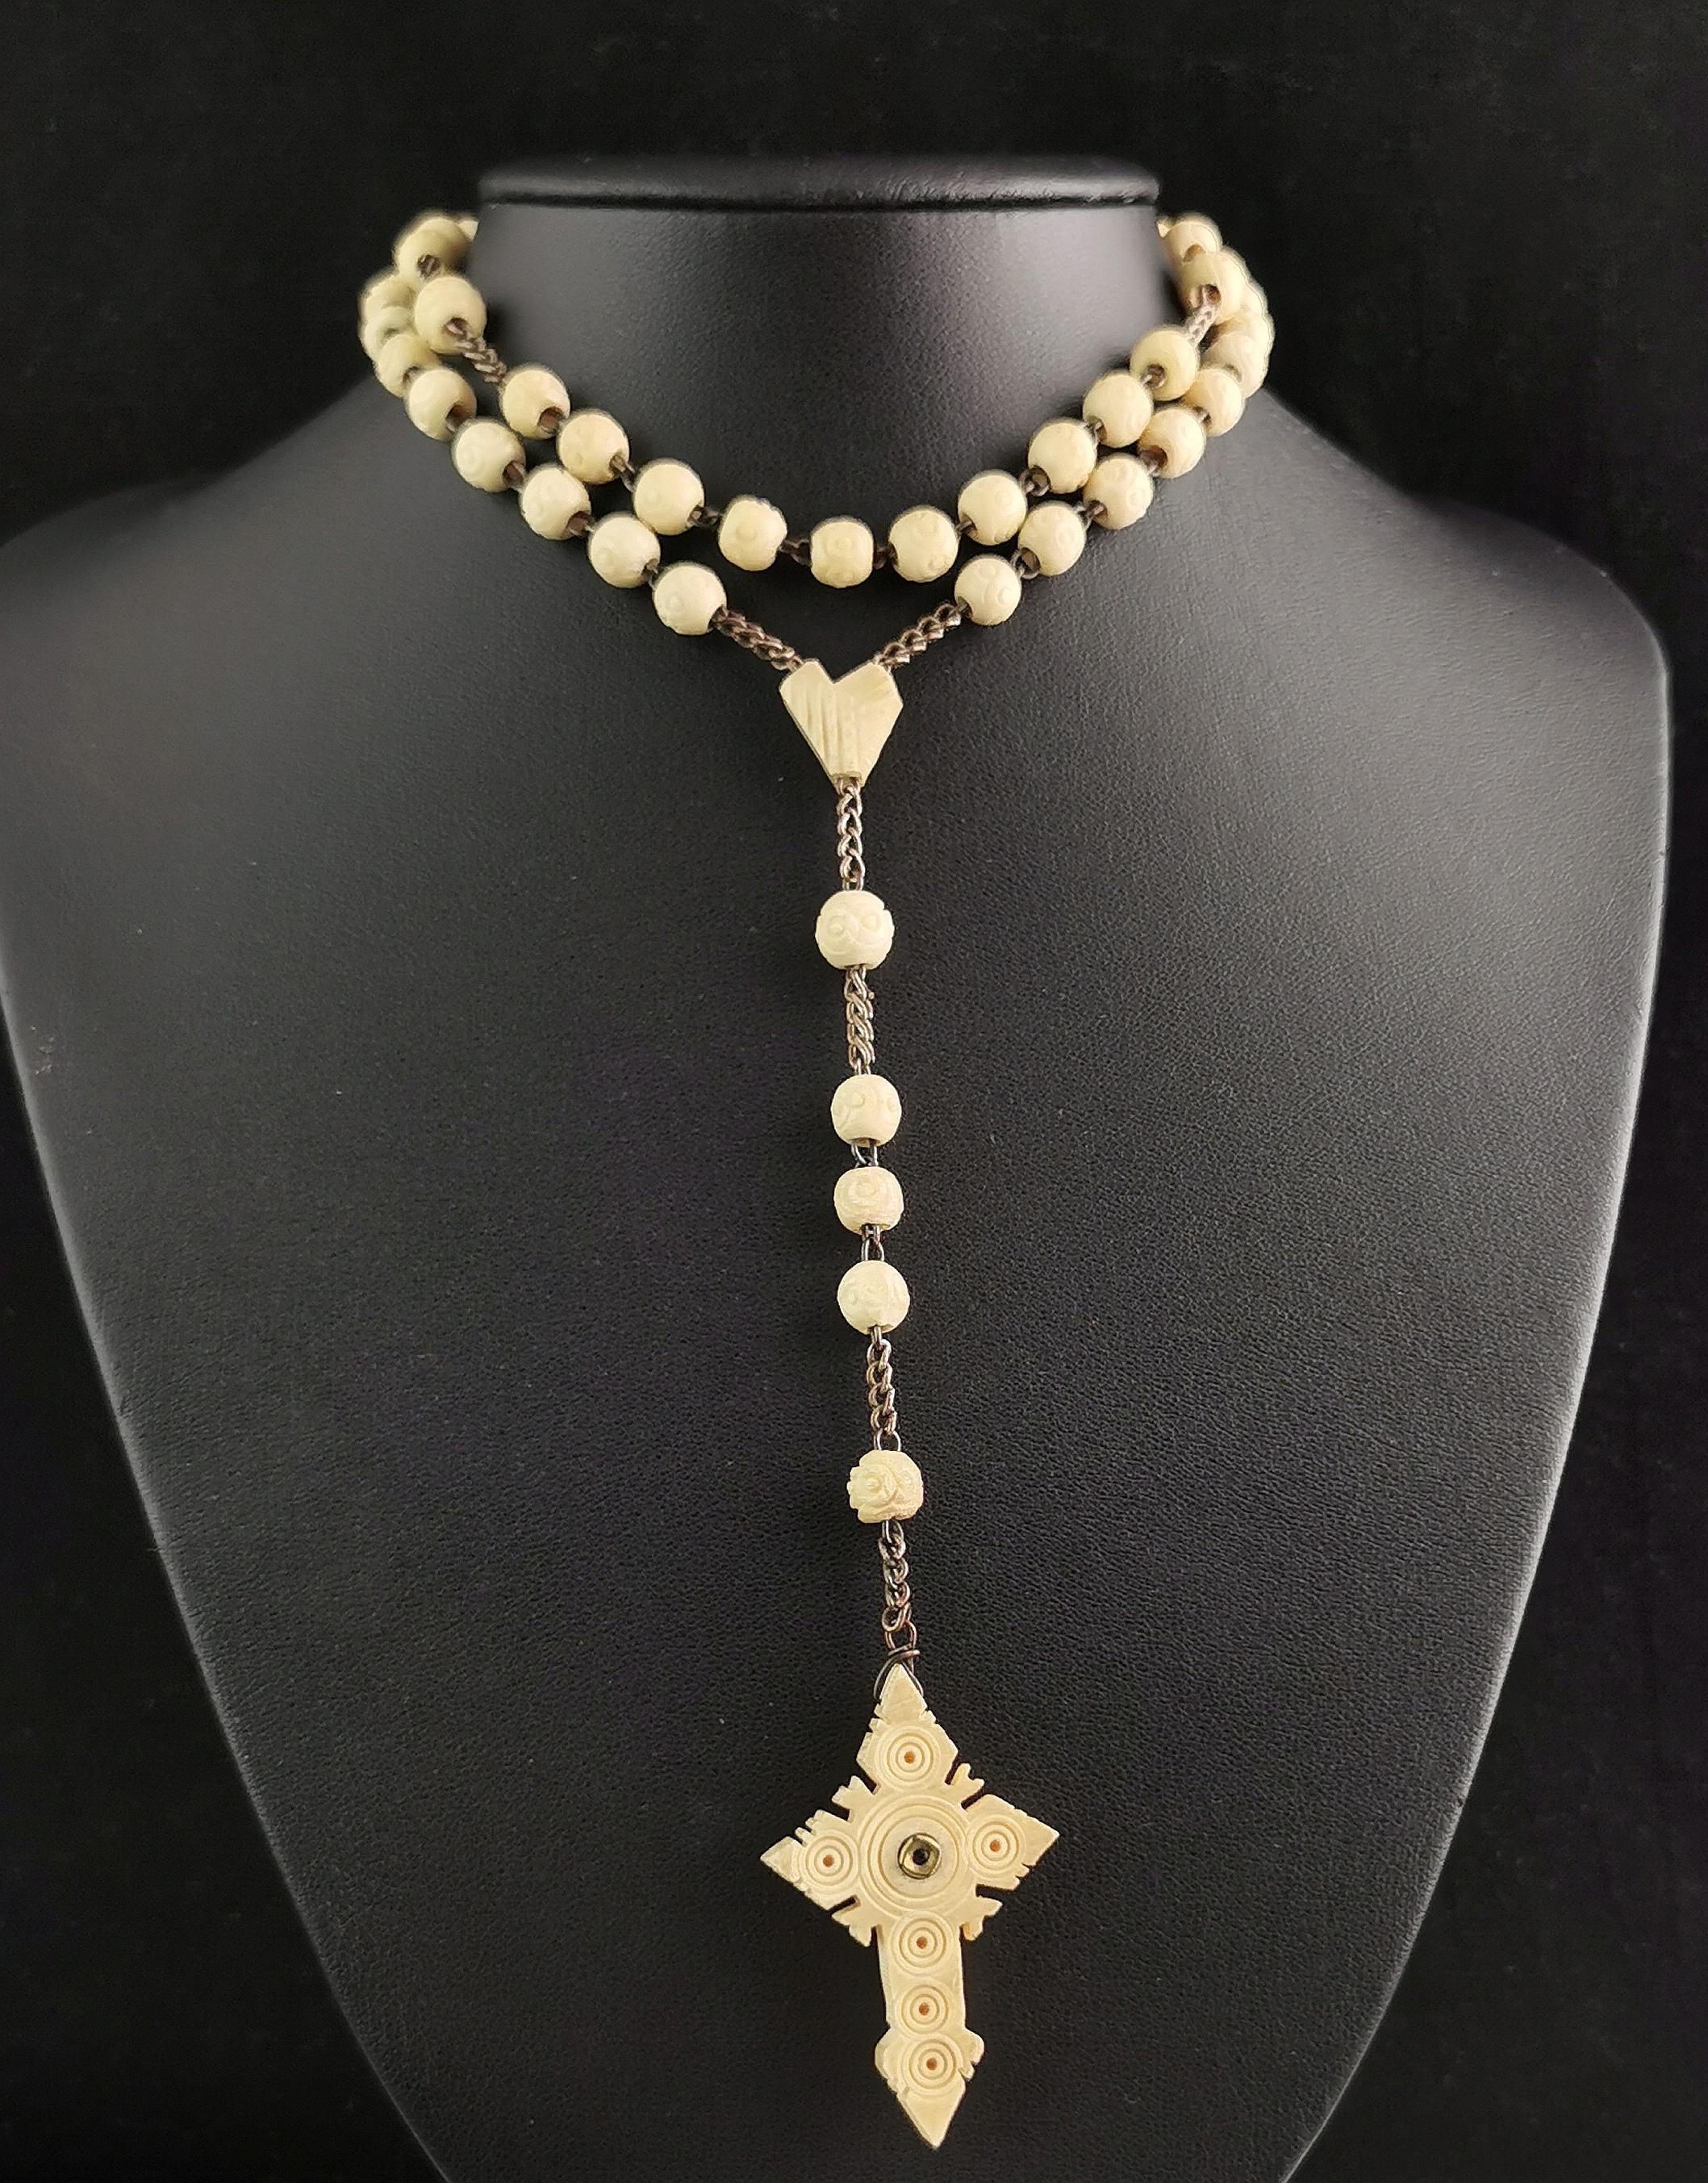 Antique French carved bone rosary bead necklace, Cross pendant, Stanhope  4